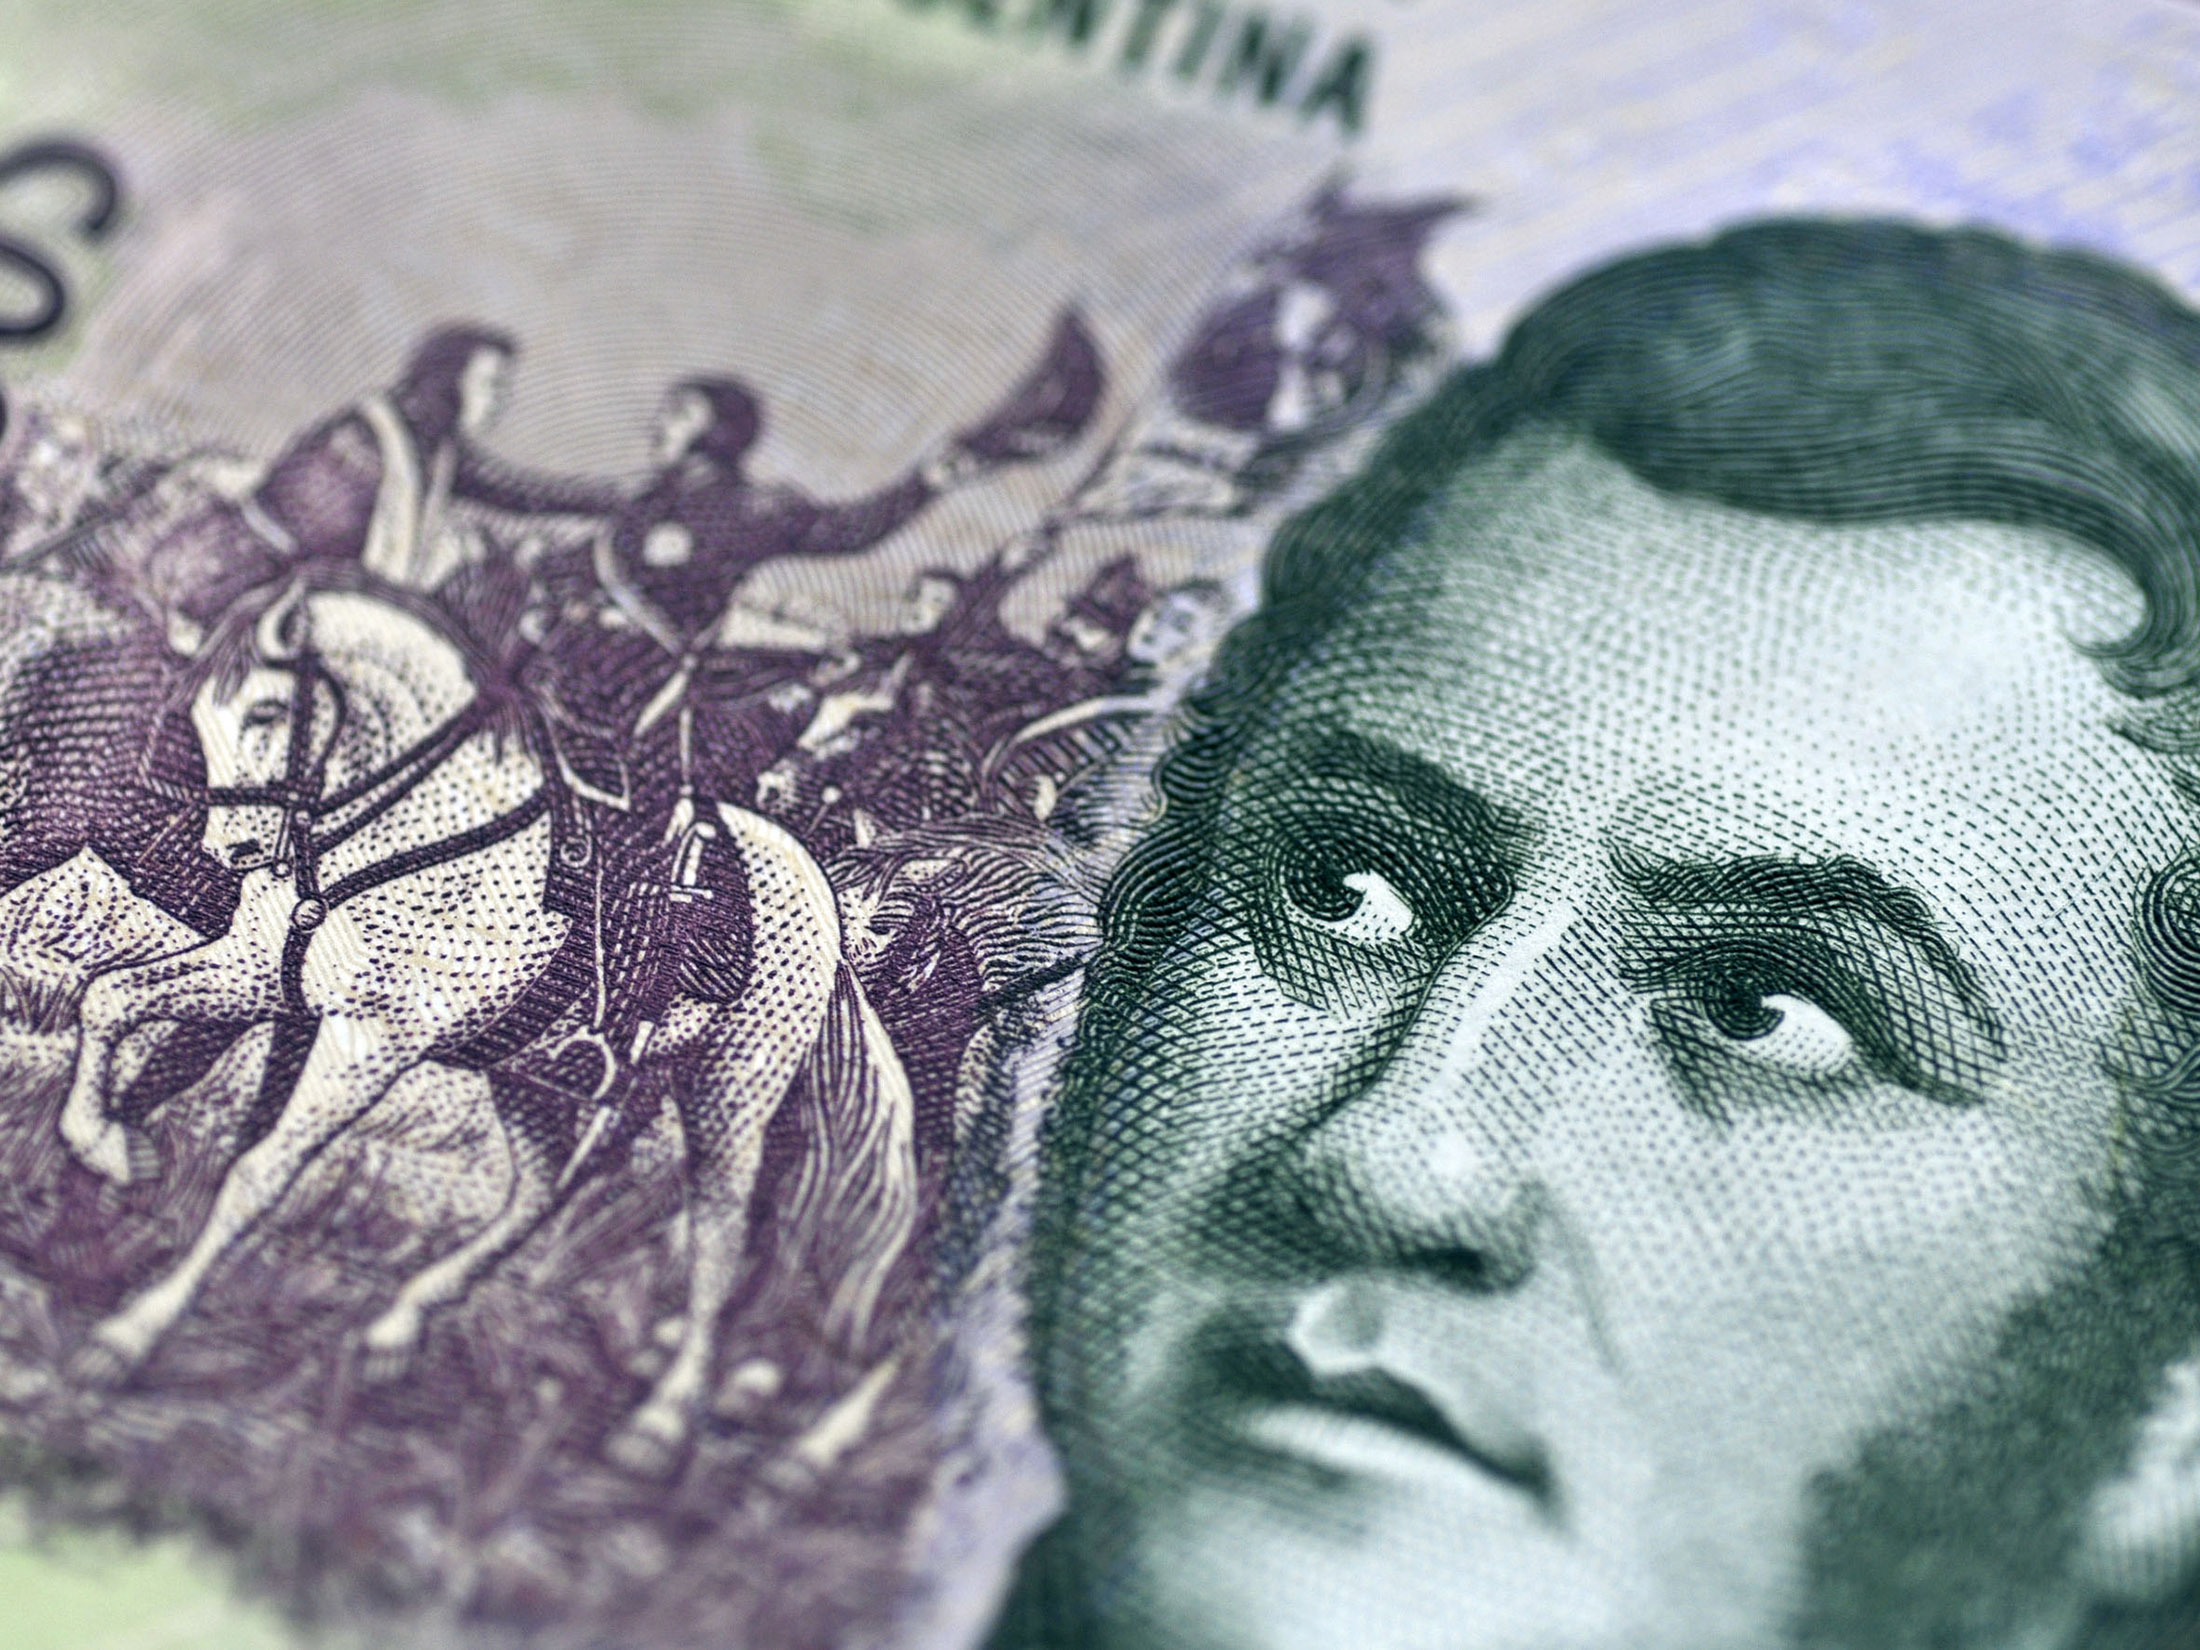 An Argentine five peso note